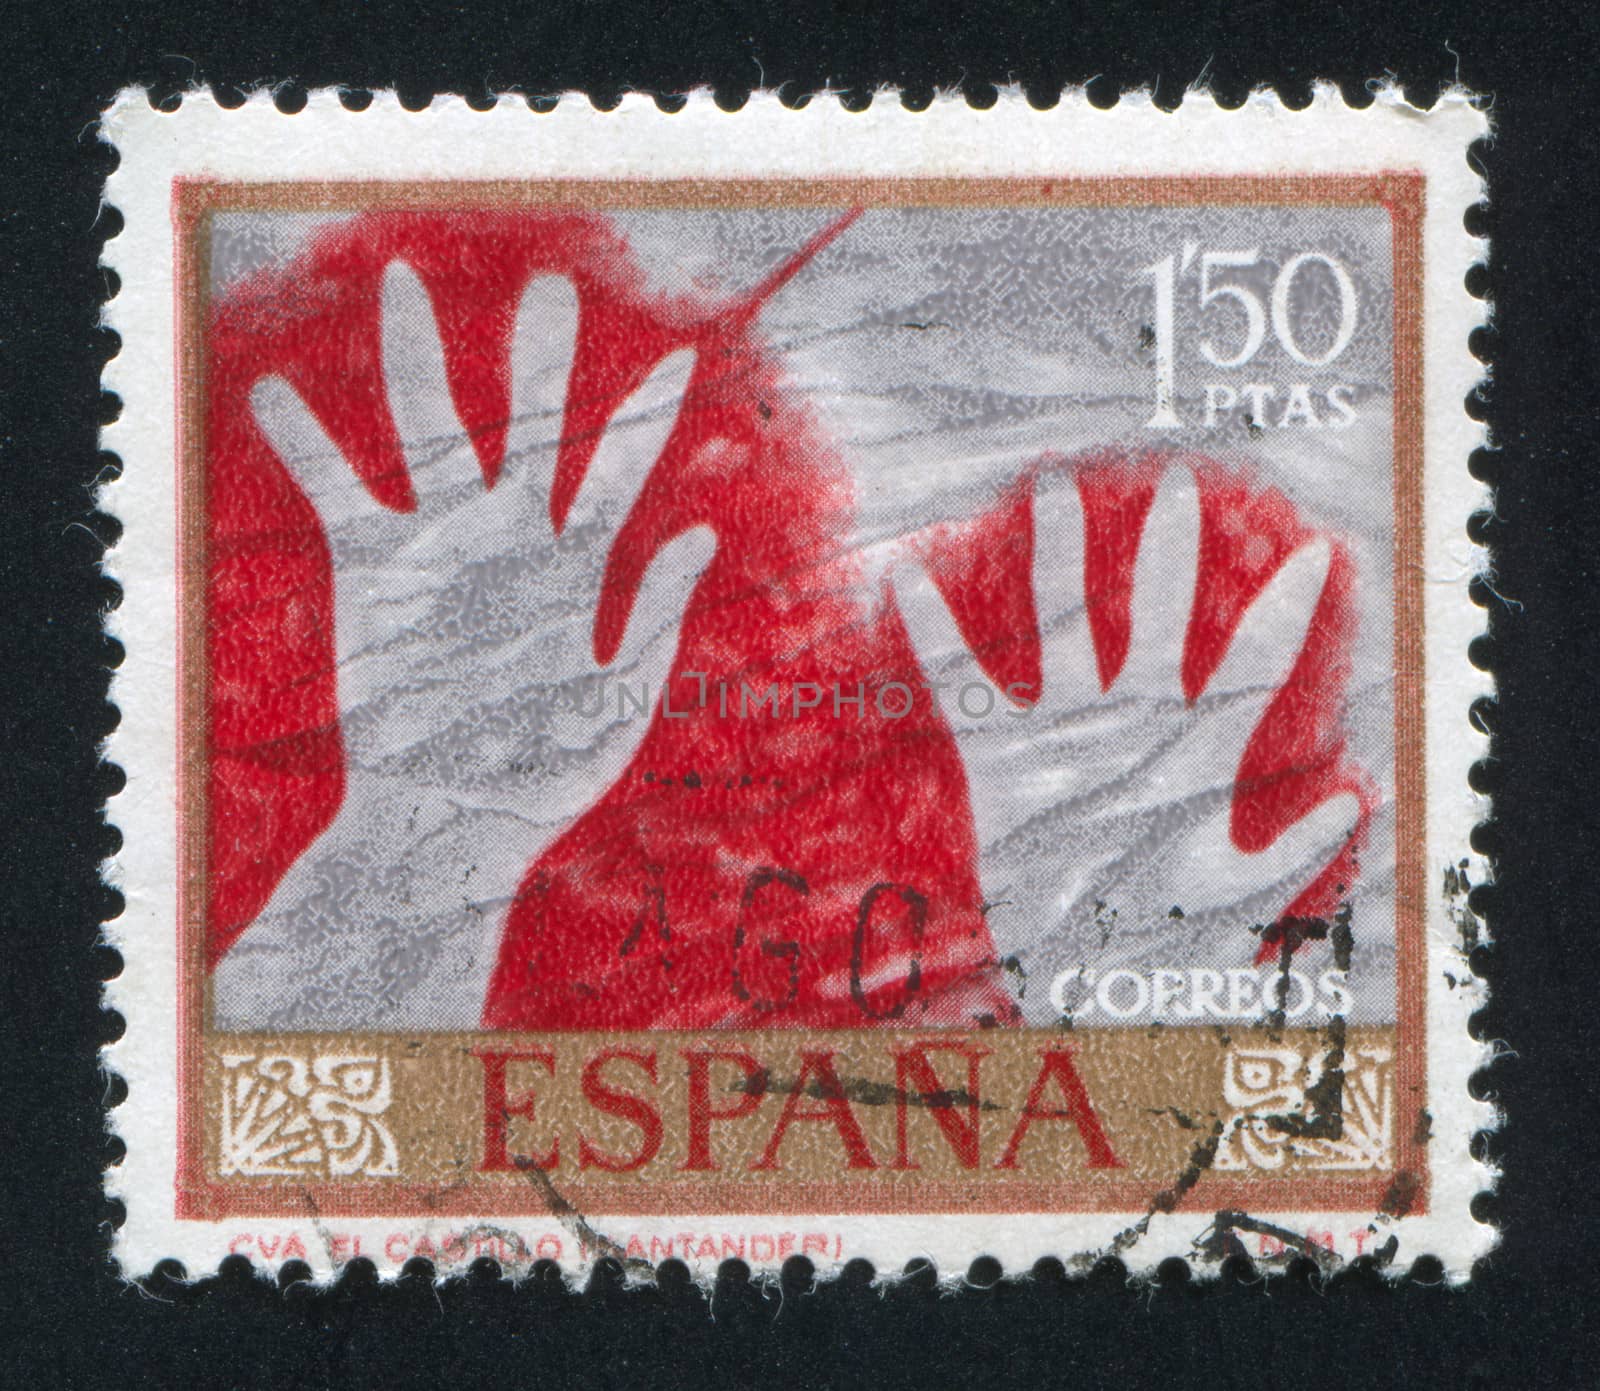 SPAIN - CIRCA 1967: stamp printed by Spain, shows Hands, circa 1967